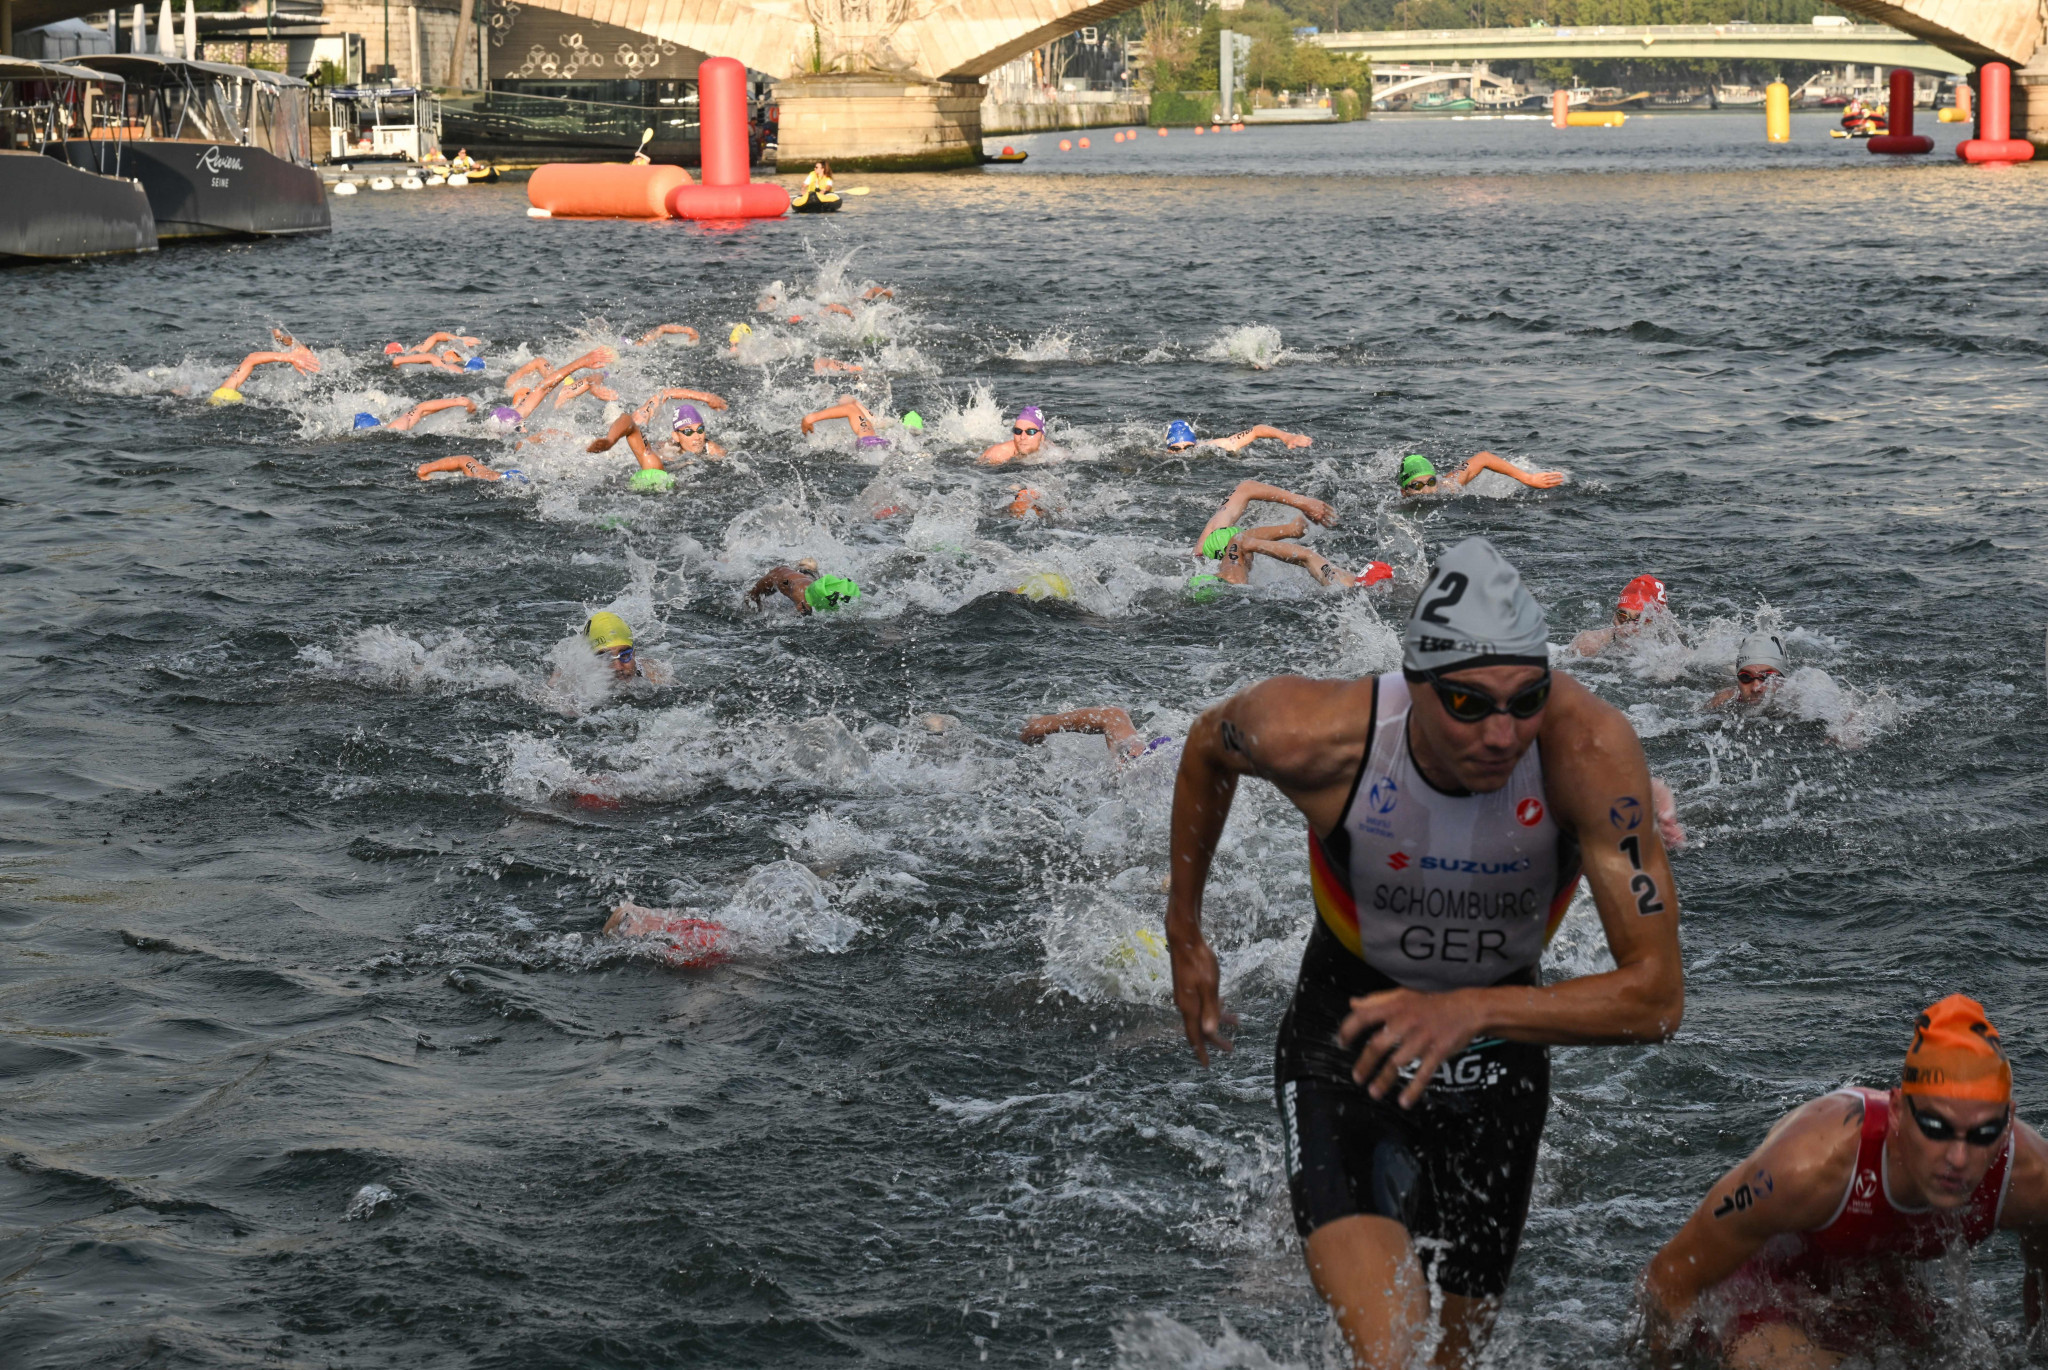 Triathletes used the Seine during yesterday's Paris 2024 test event ©Getty Images